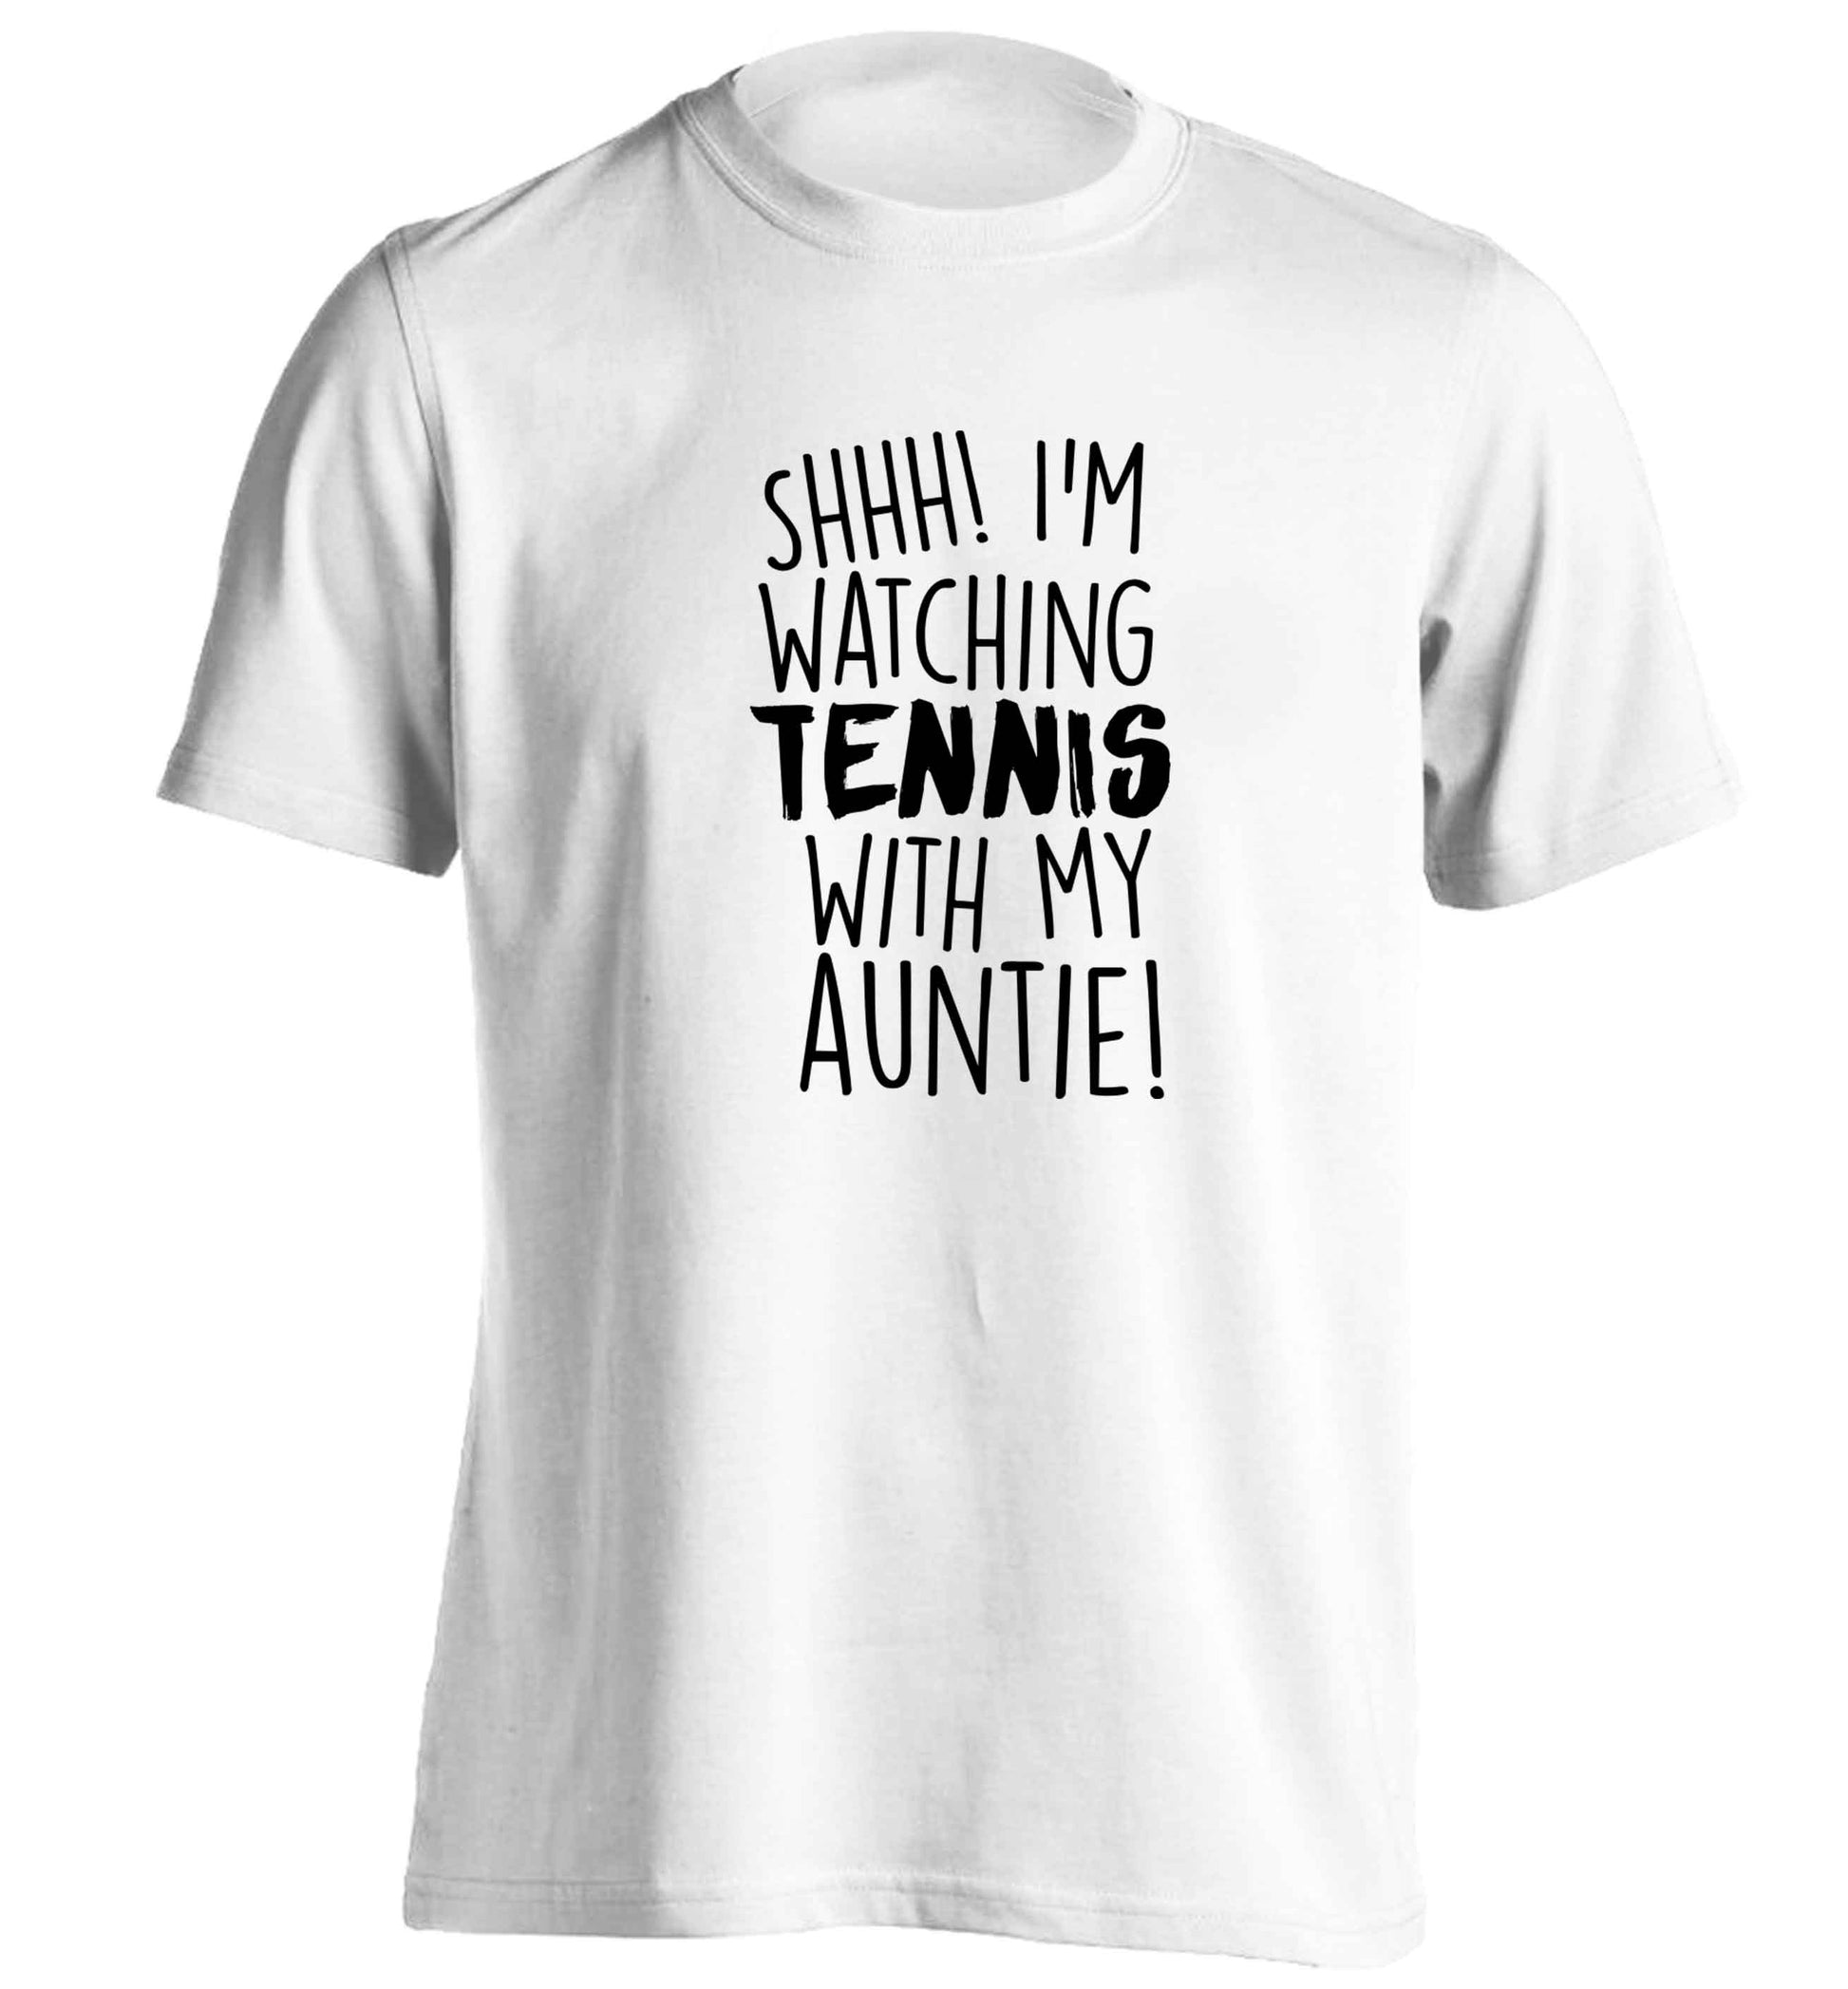 Shh! I'm watching tennis with my auntie! adults unisex white Tshirt 2XL